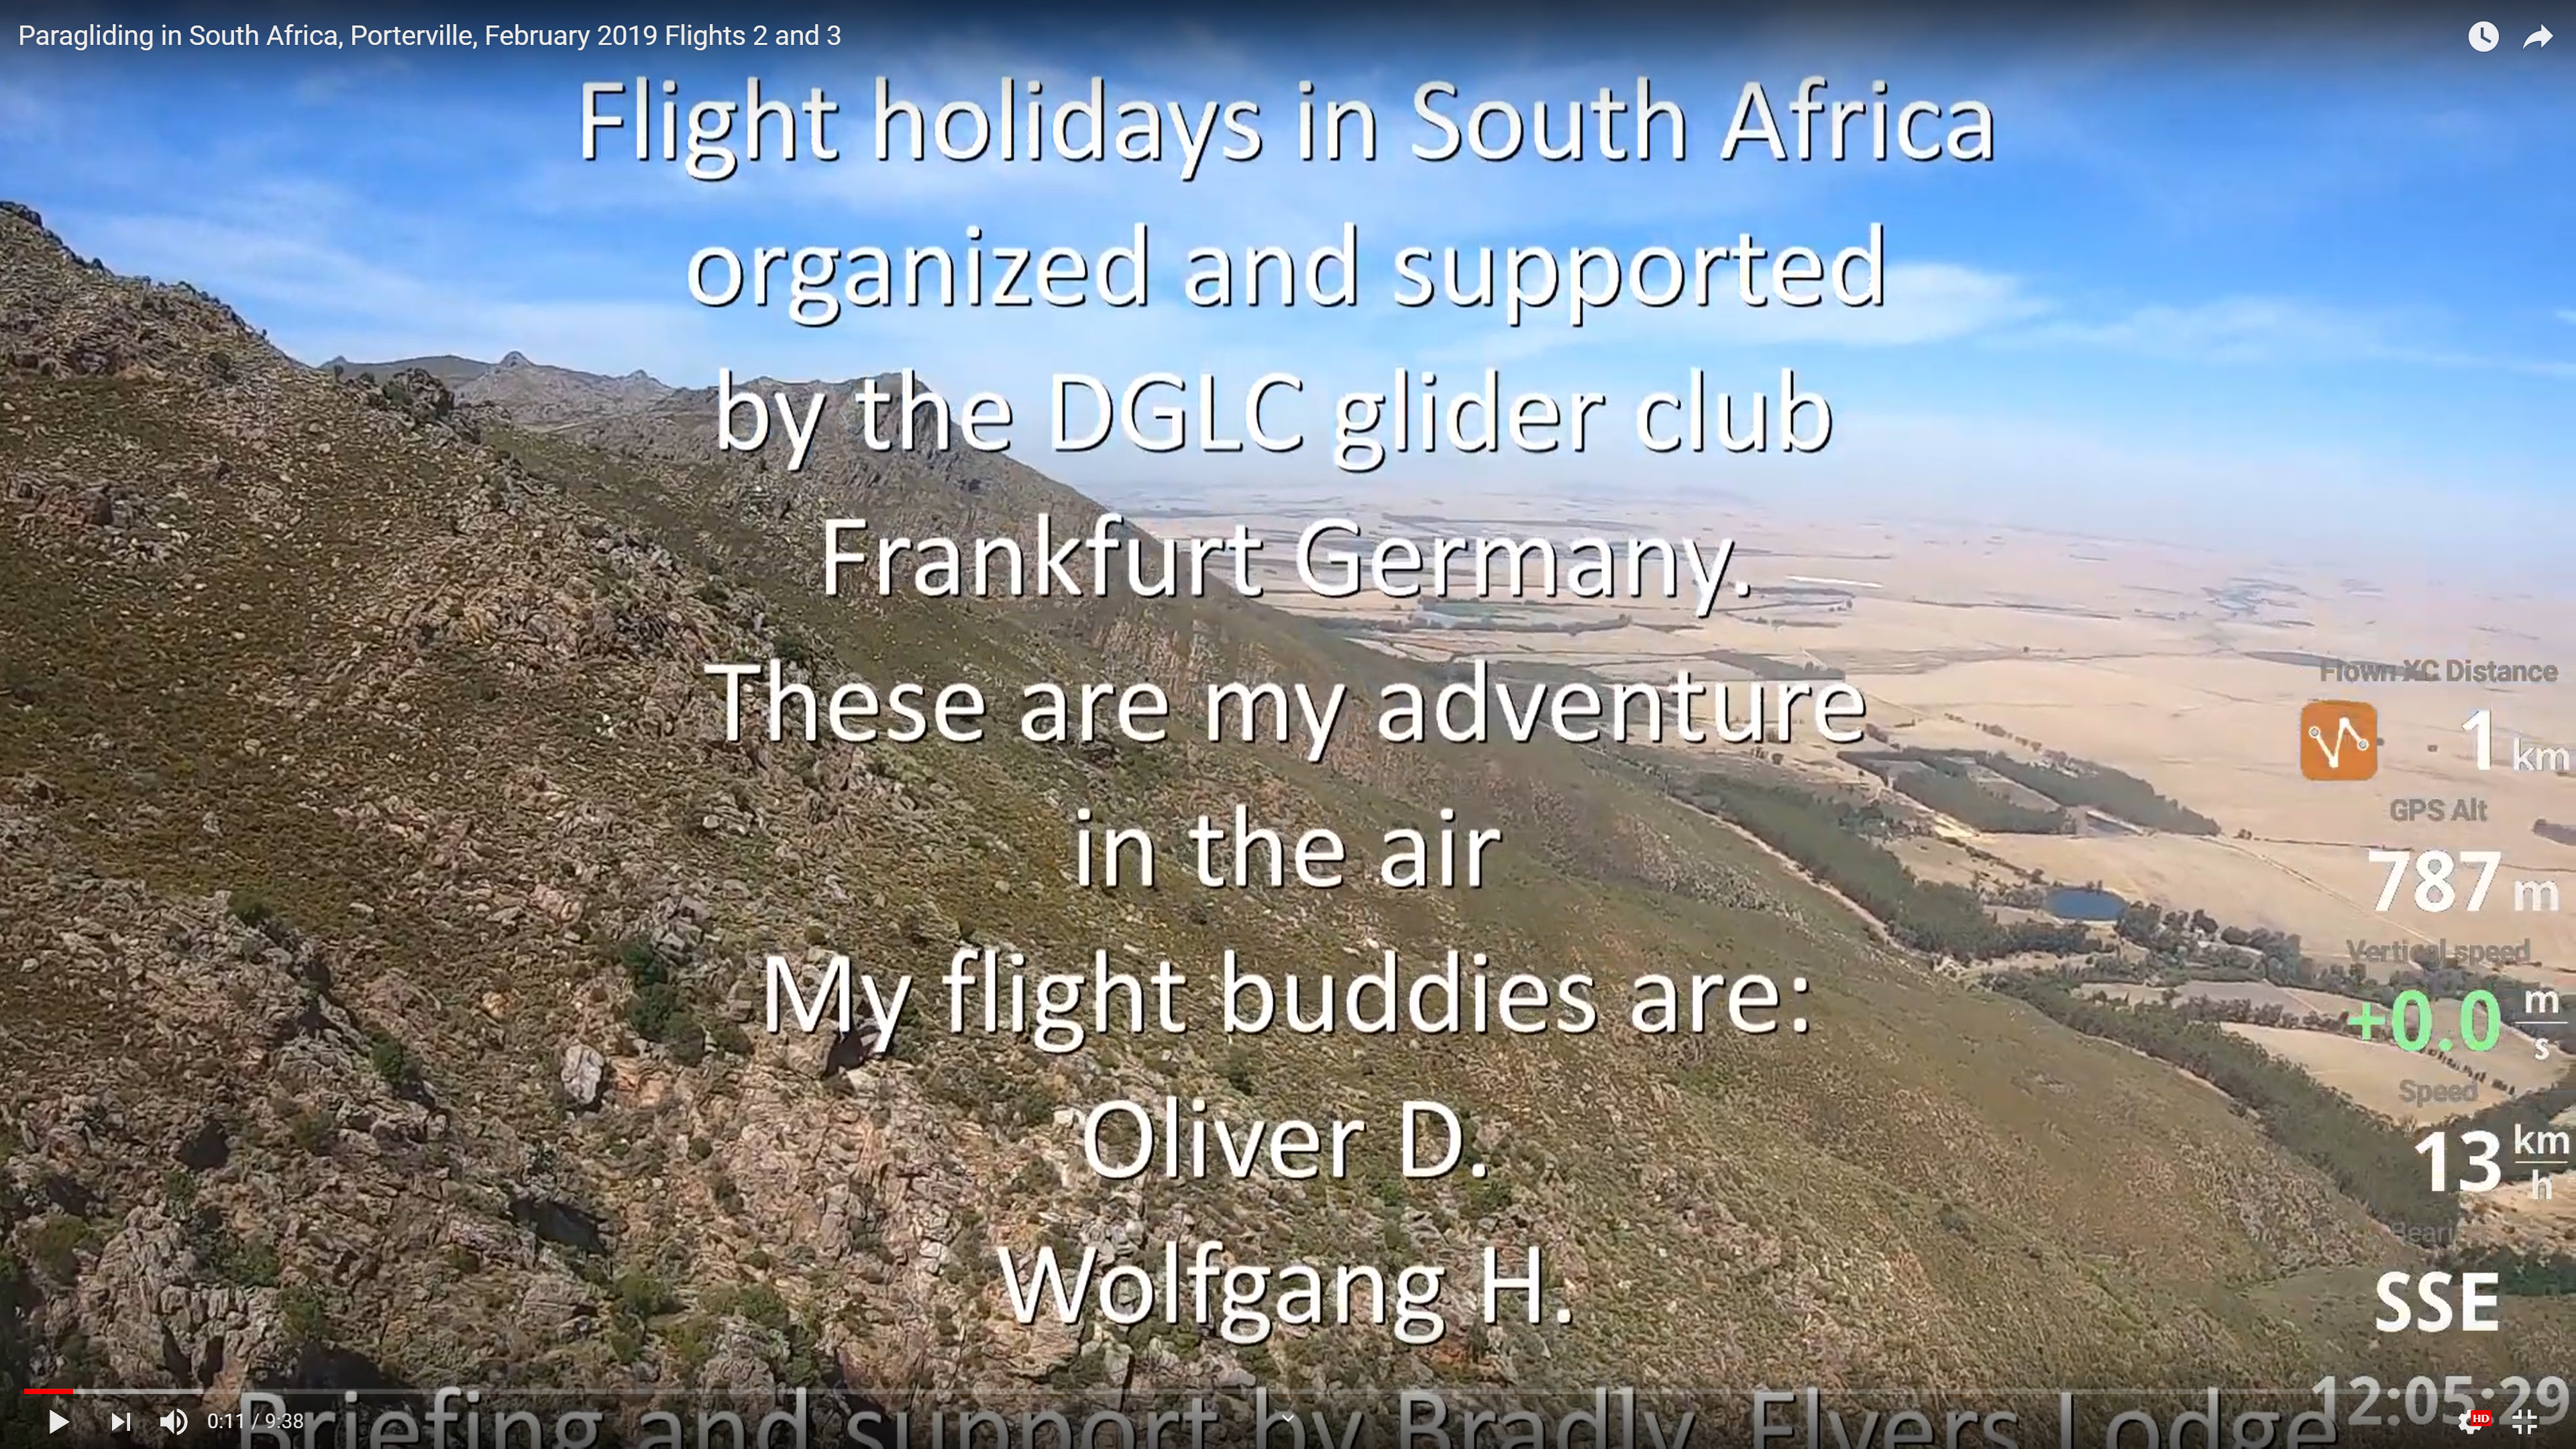 You are currently viewing Paragliding in South Africa, Porterville, February 2019 Flights 2 and 3